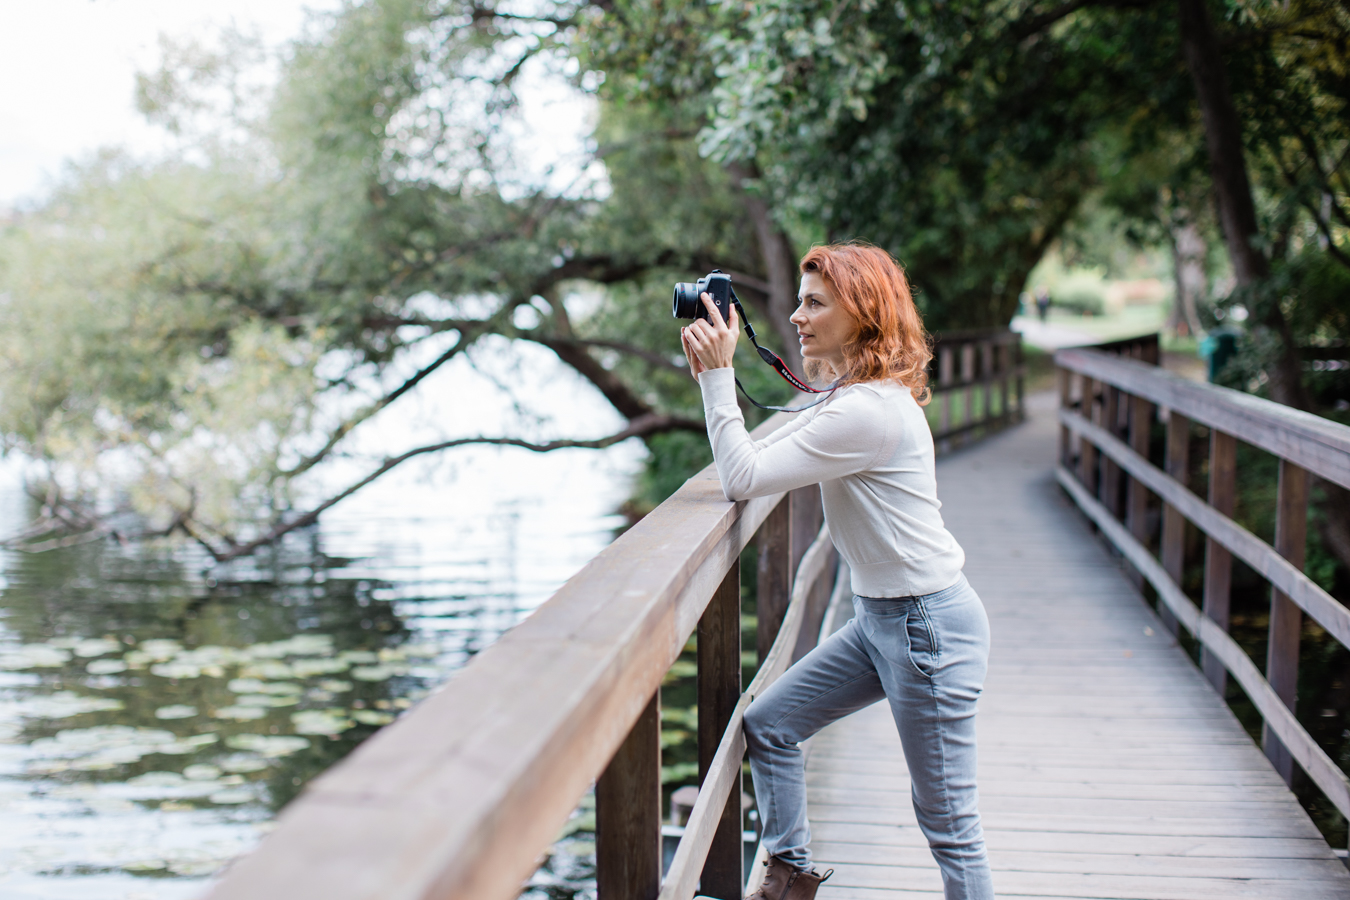 Case study: How we planned this Stockholm photo shoot – from locations to styling // Writer